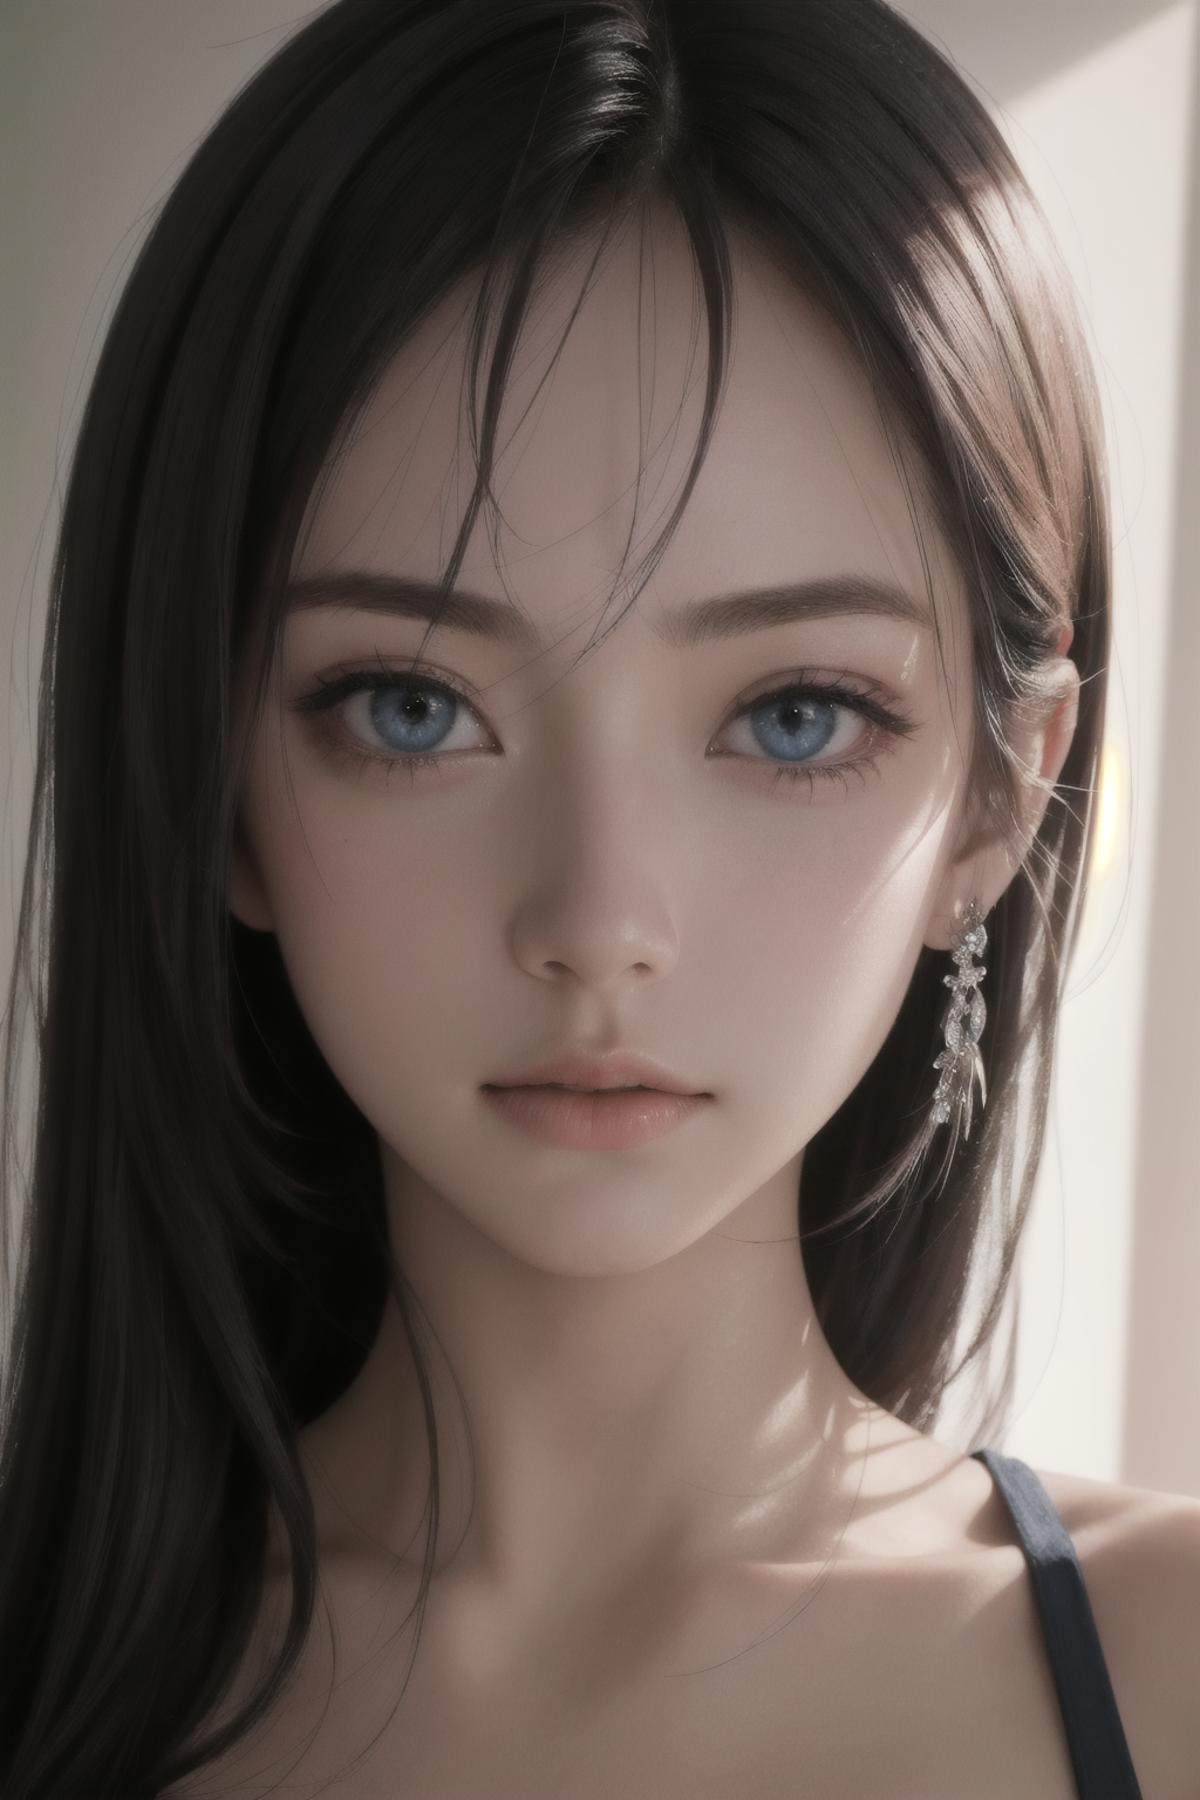 AI model image by pope_phred